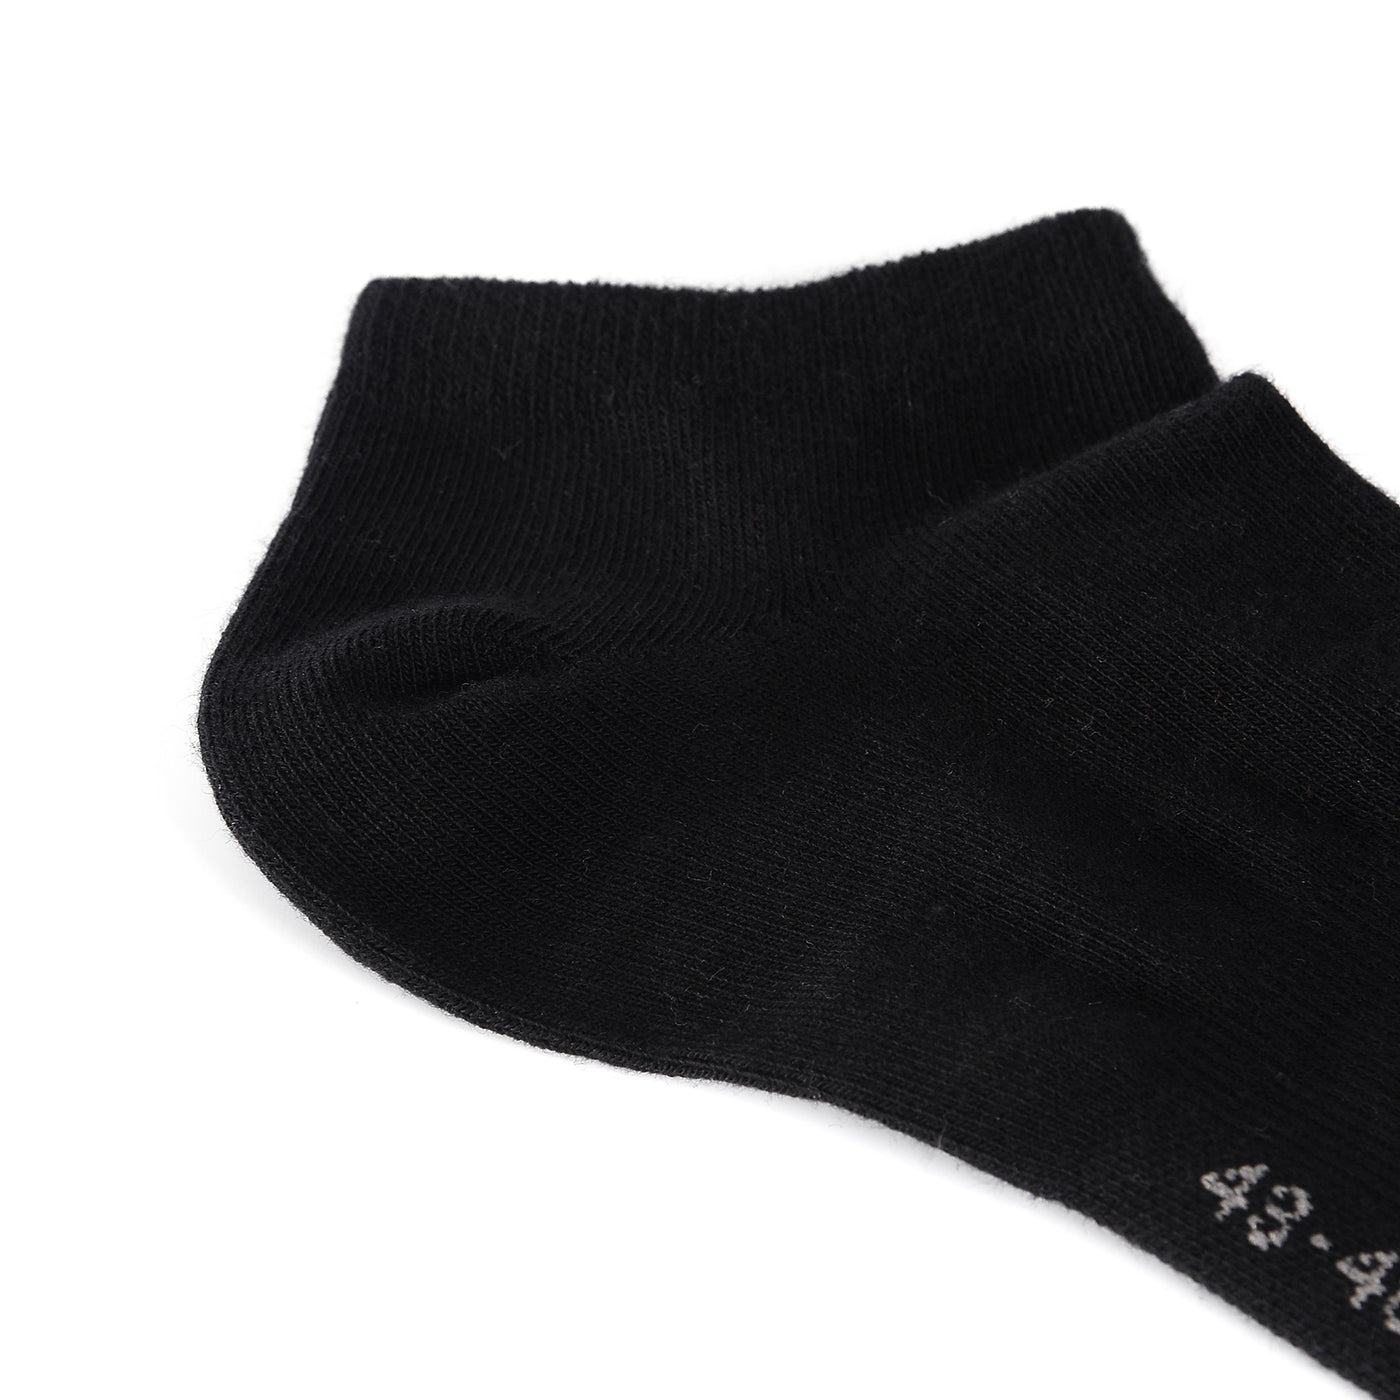 Laulax 6 Pairs Finest Combed Cotton Trainer Socks, Black, Size UK 9 - 11 / Europ 43 - 46, Gift bag with socks wash bag